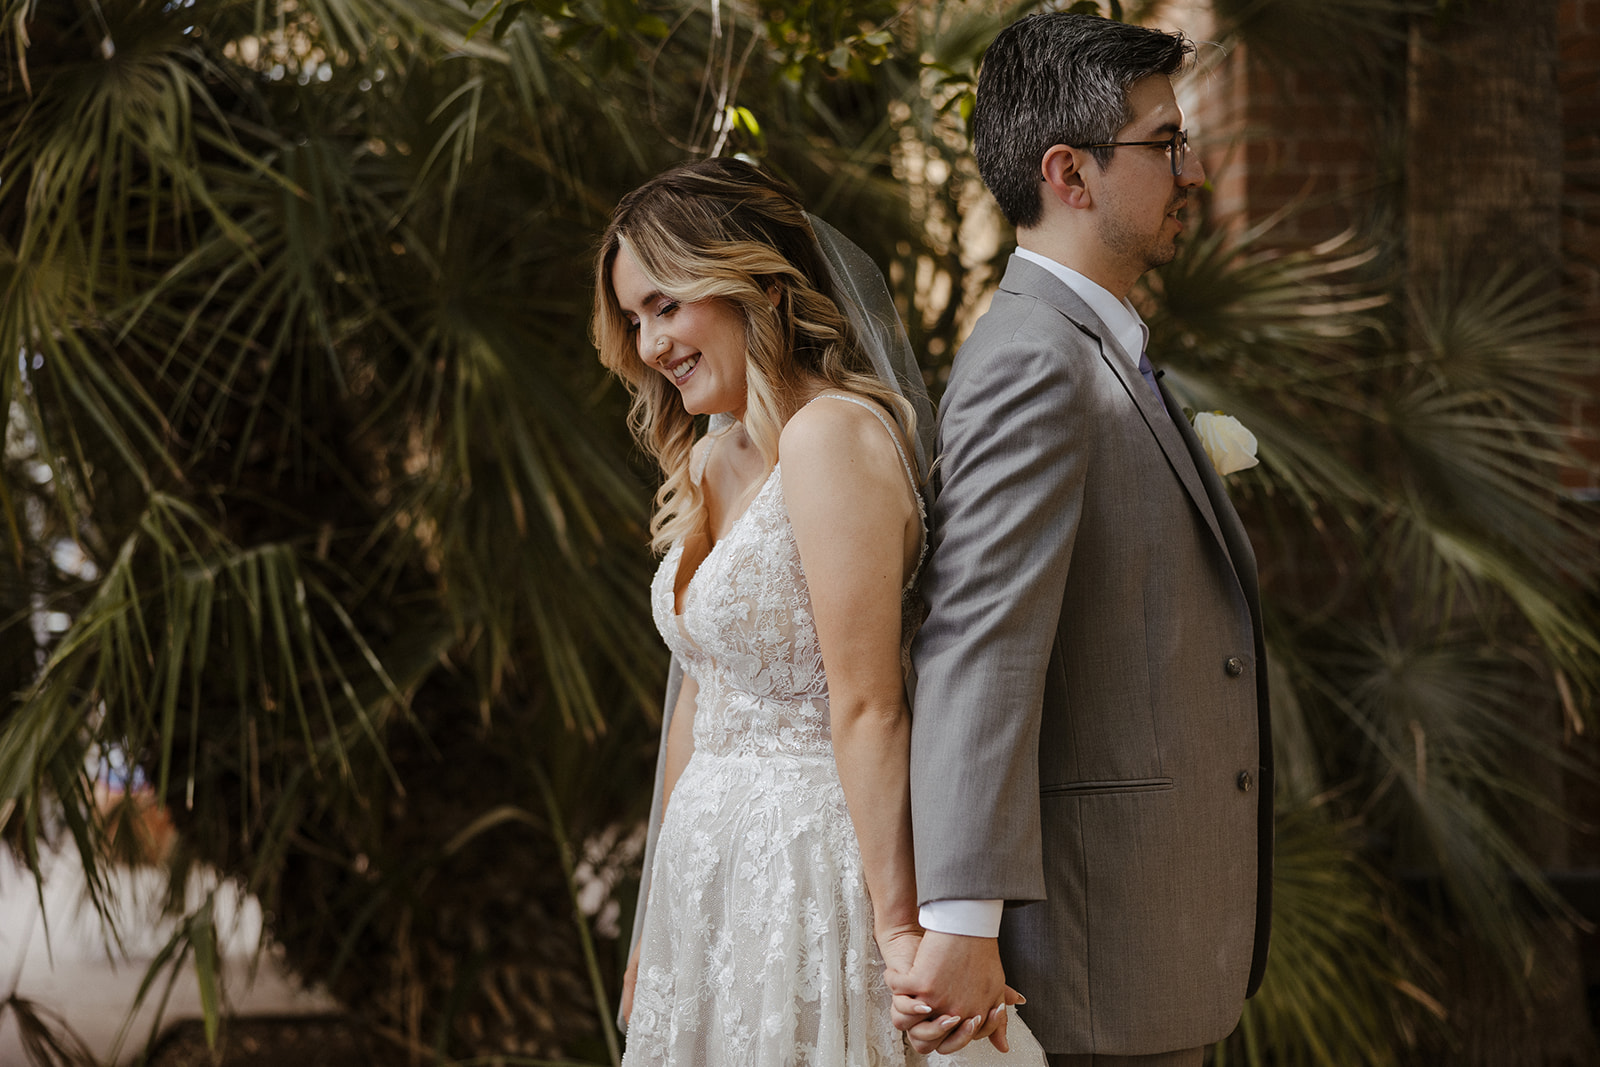 Bride and groom do a first touch photoshoot before their dreamy Arizona wedding day!